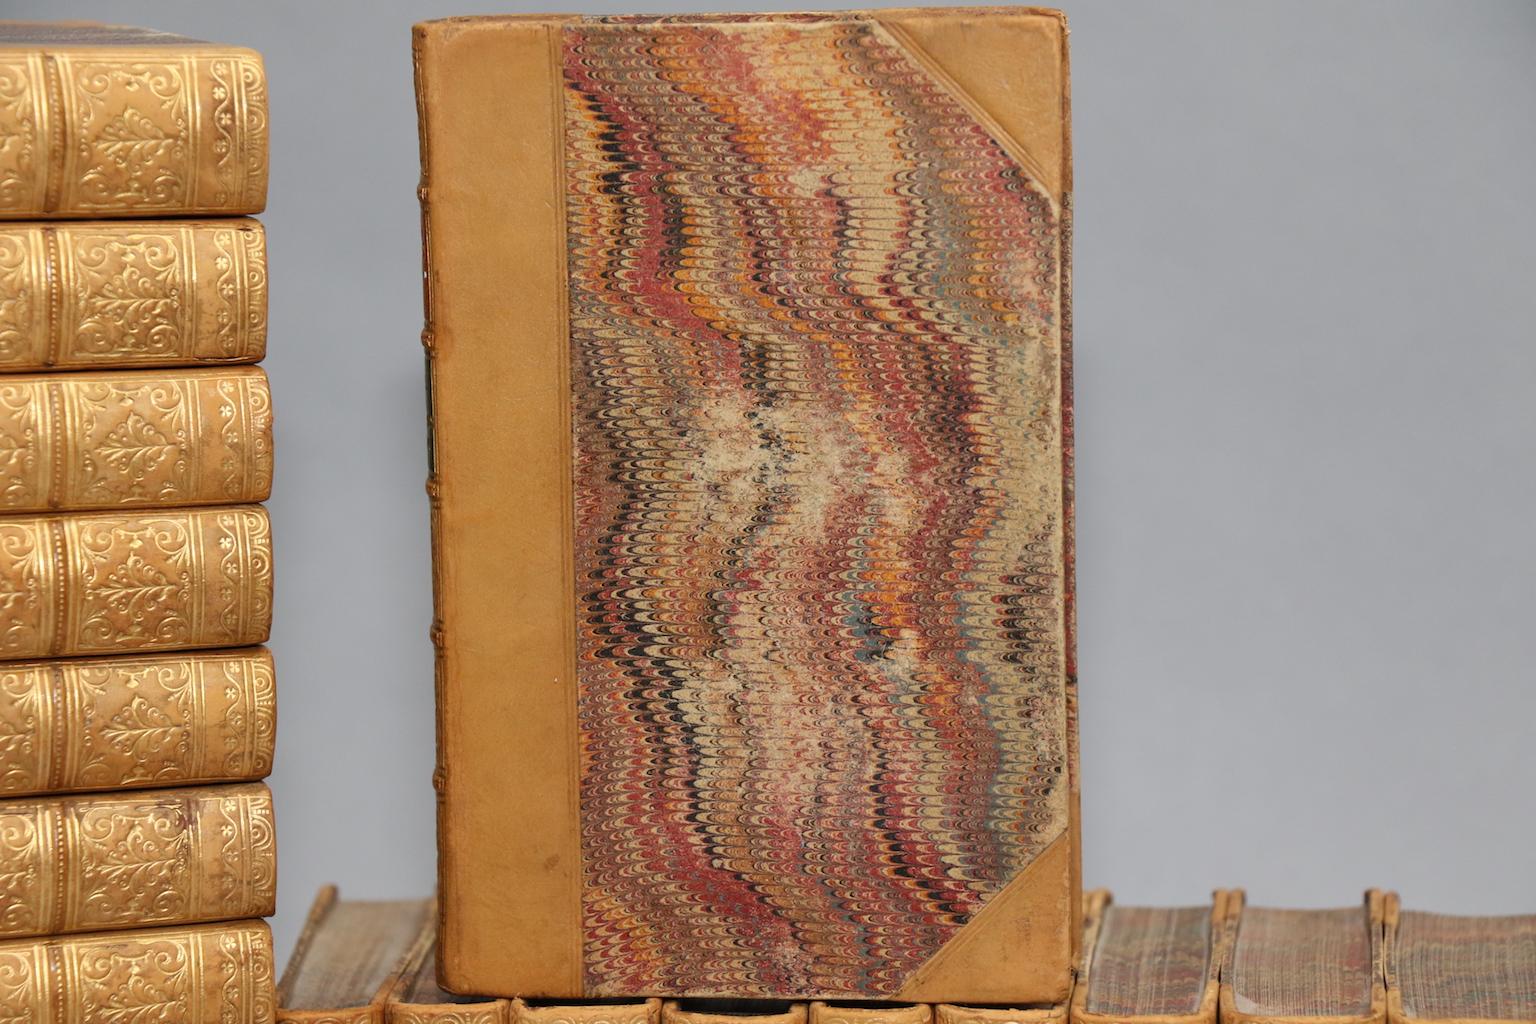 Rare first edition. Leather bound. 40 volumes. Small octavos. Contemporarily bound in three-quarter tan calf leather with marbled boards and edges and raised bands with gilt detailing on spines. Profusely illustrated with hand-colored plates